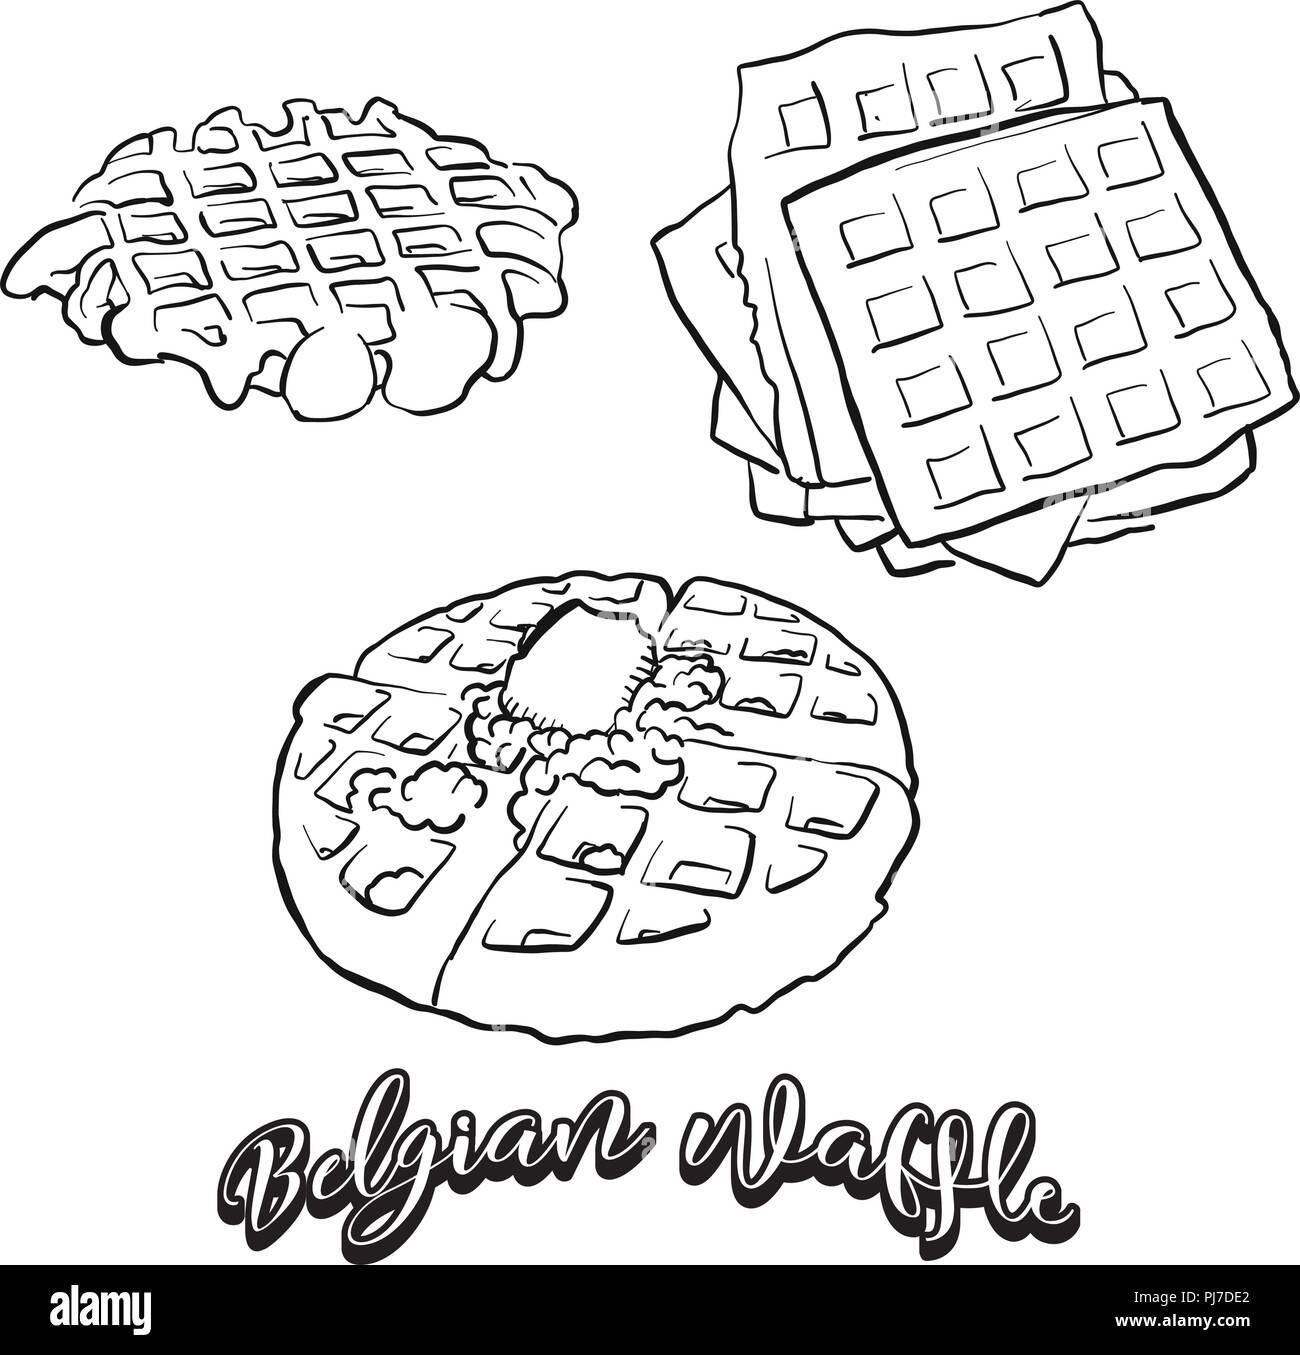 Hand drawn sketch of Belgian waffle bread. Vector drawing of Waffle food, usually known in Belgium. Bread illustration series. Stock Vector